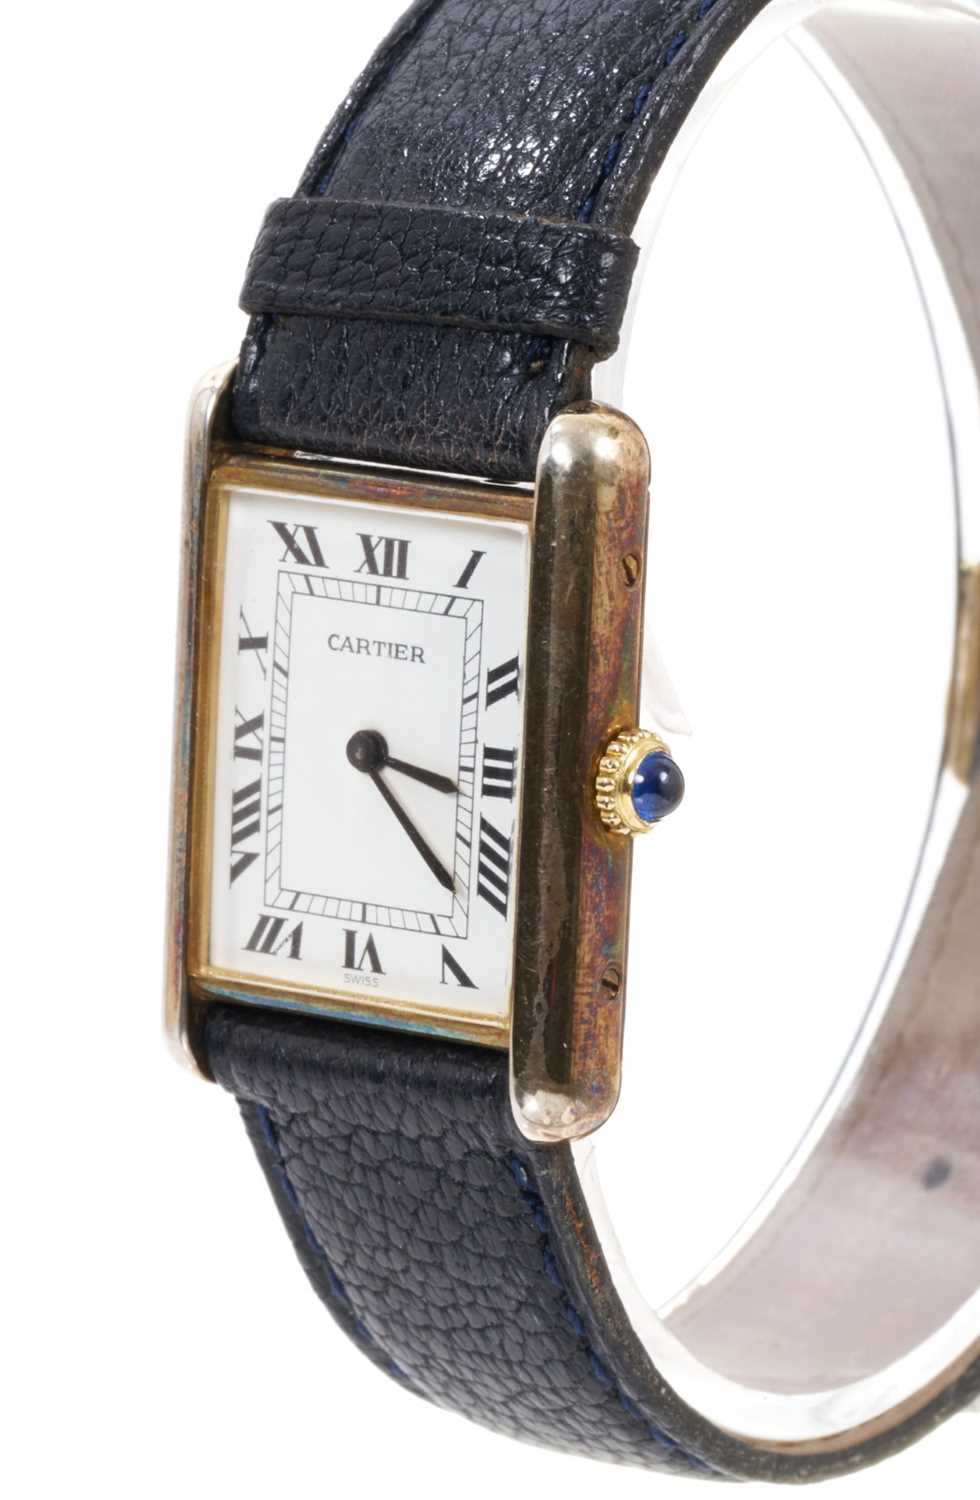 Cartier silver gilt Tank wristwatch with manual wind movement - Image 2 of 5